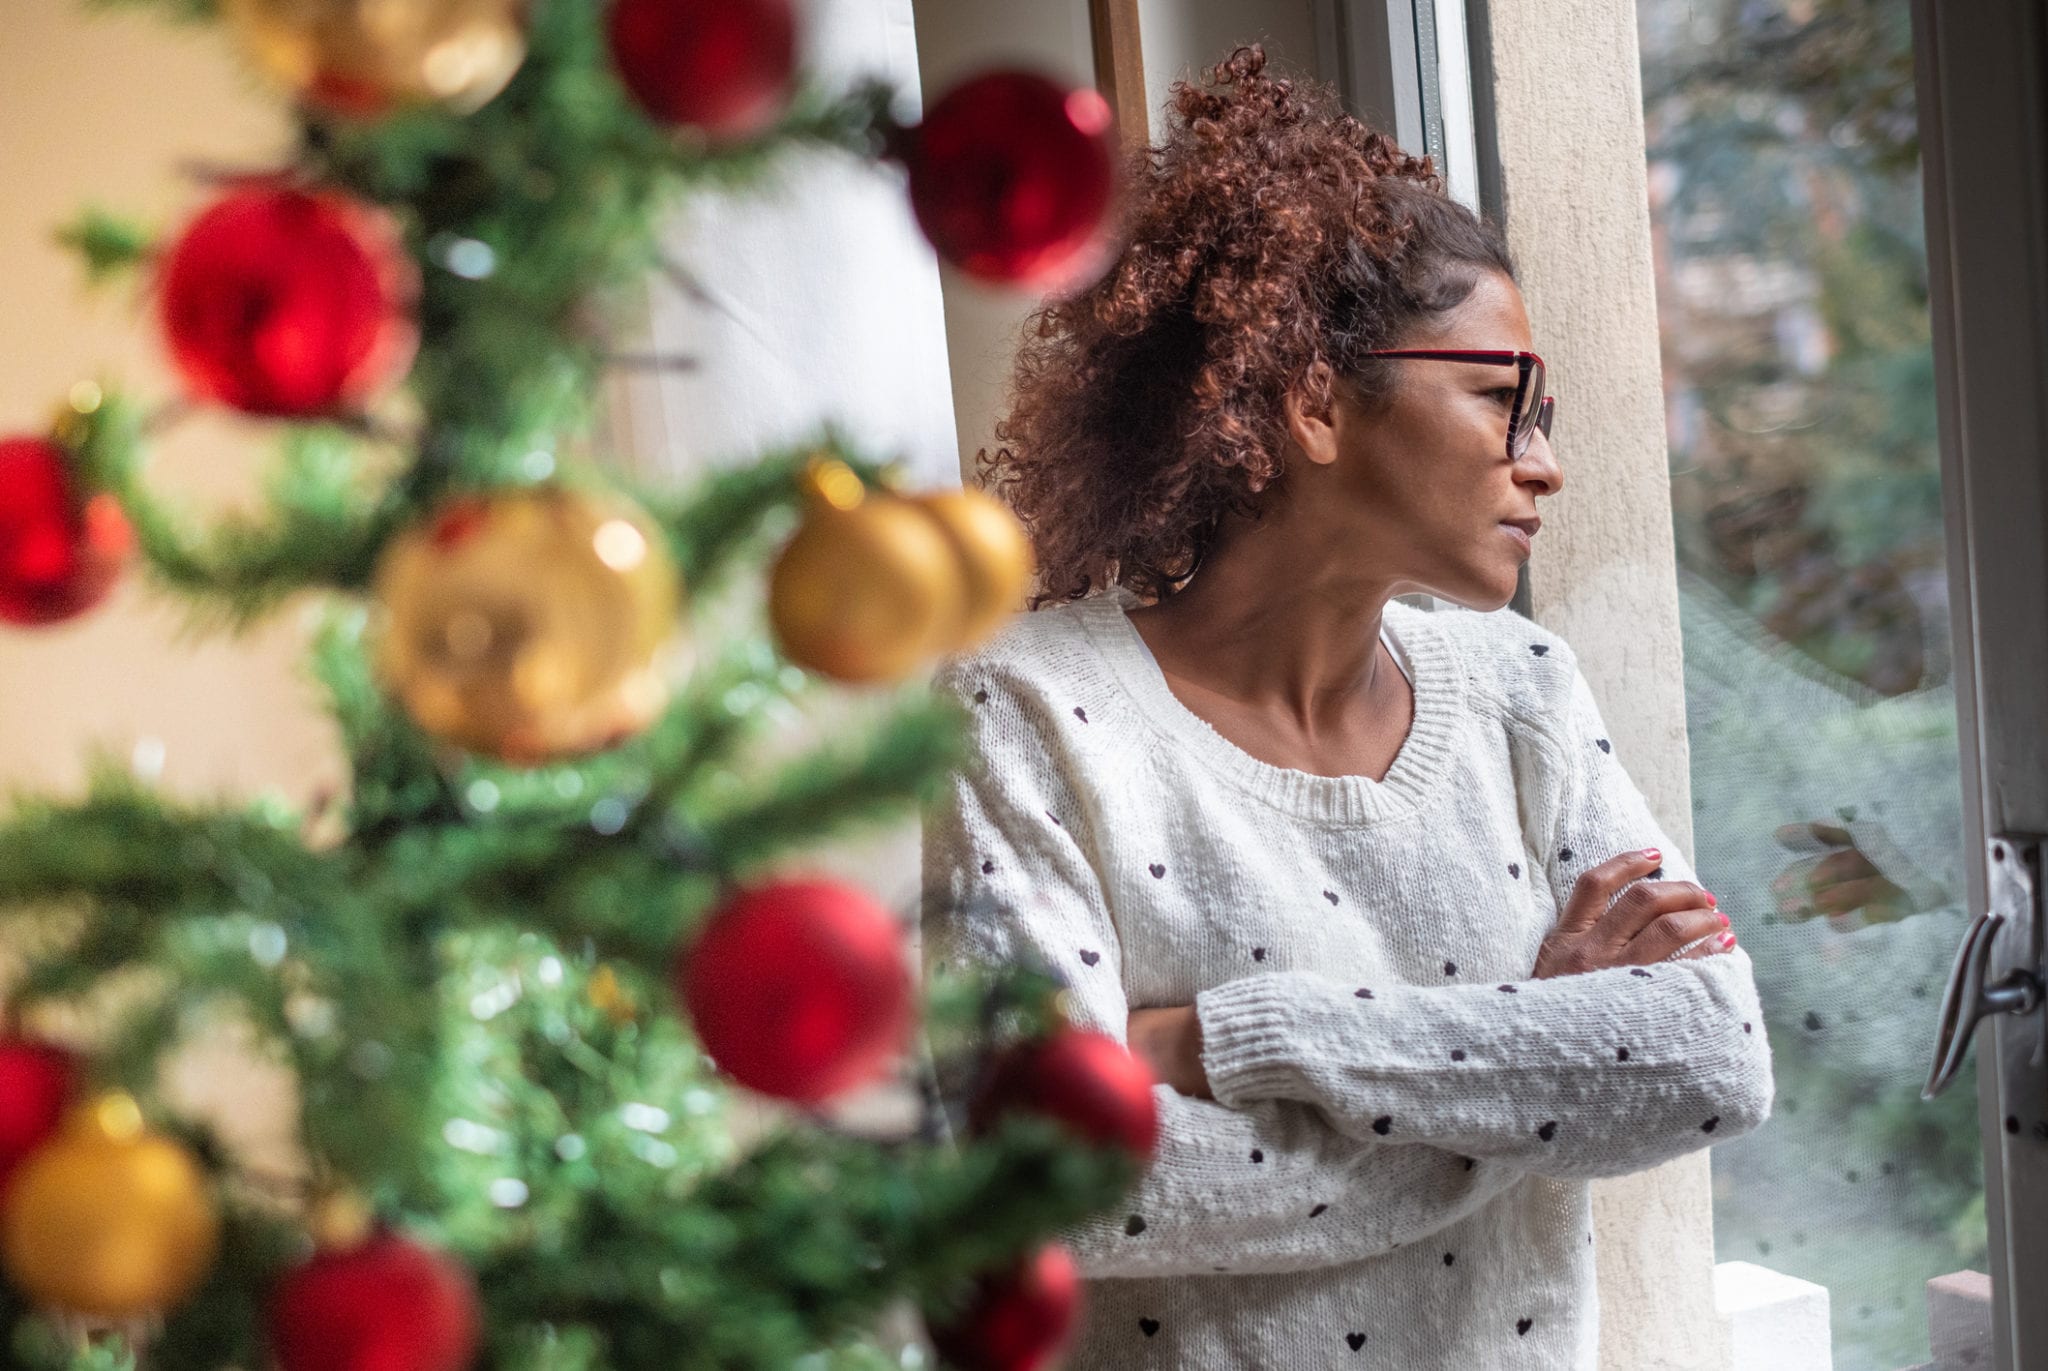 A woman looks out a window pensively during Christmas.